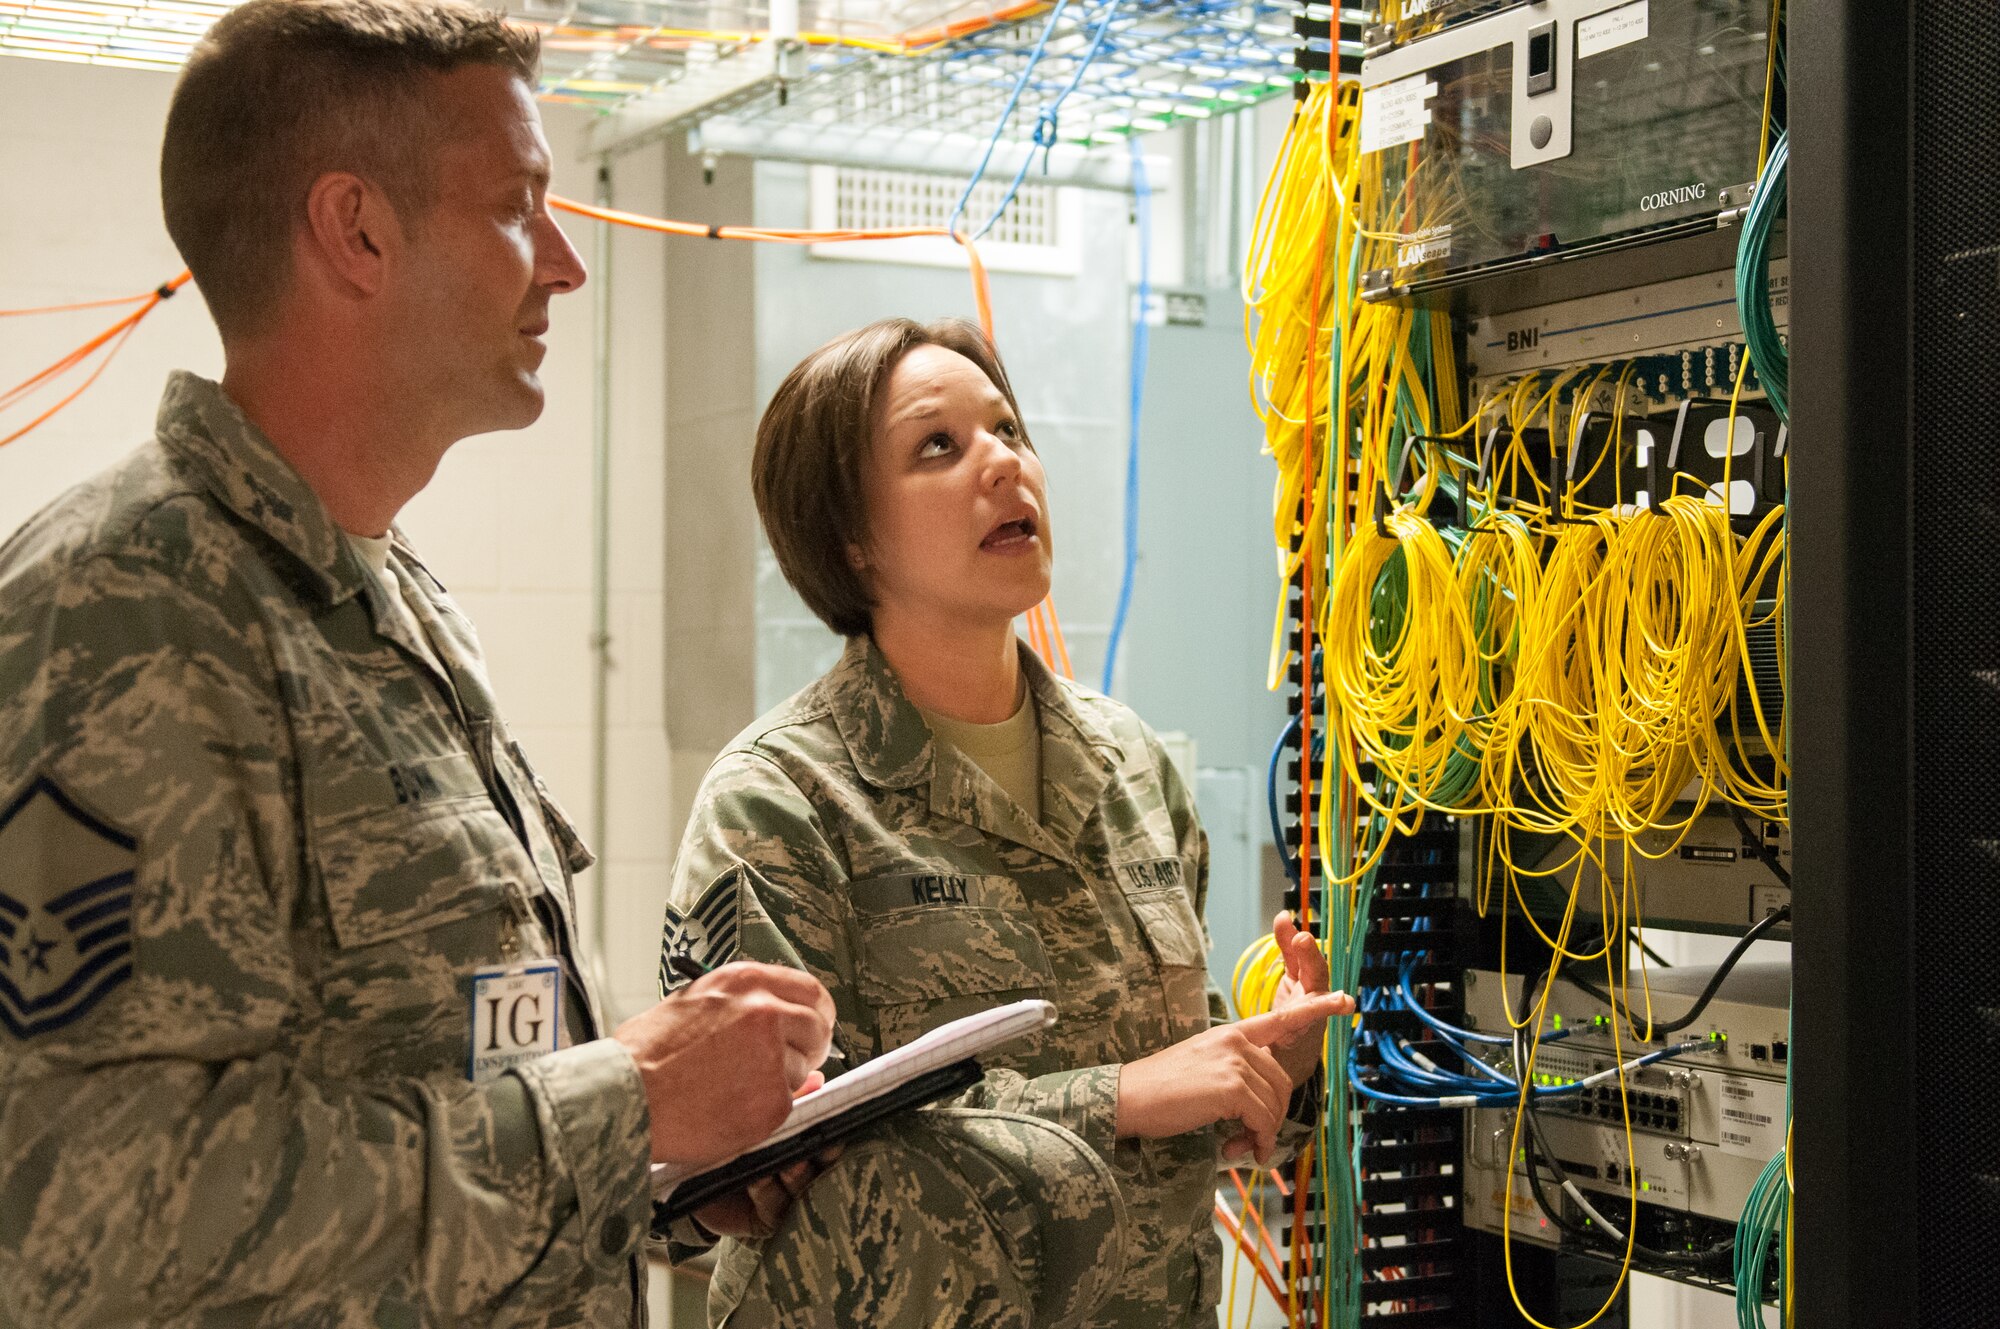 Tech. Sgt. Kristin Kelly, cyber transport technician for the Kentucky Air National Guard’s 123rd Communications Flight, examines the 123rd Airlift Wing’s base network infrastructure with Master Sgt. Kyle Bunn, an inspector from Air Mobility Command, as part of a Consolidated Unit Inspection at the Louisville, Ky., wing May 19, 2013. The unit underwent the multi-disciplinary inspection between May 15 and 22. (U.S. Air National Guard photo by Senior Airman Vicky Spesard)